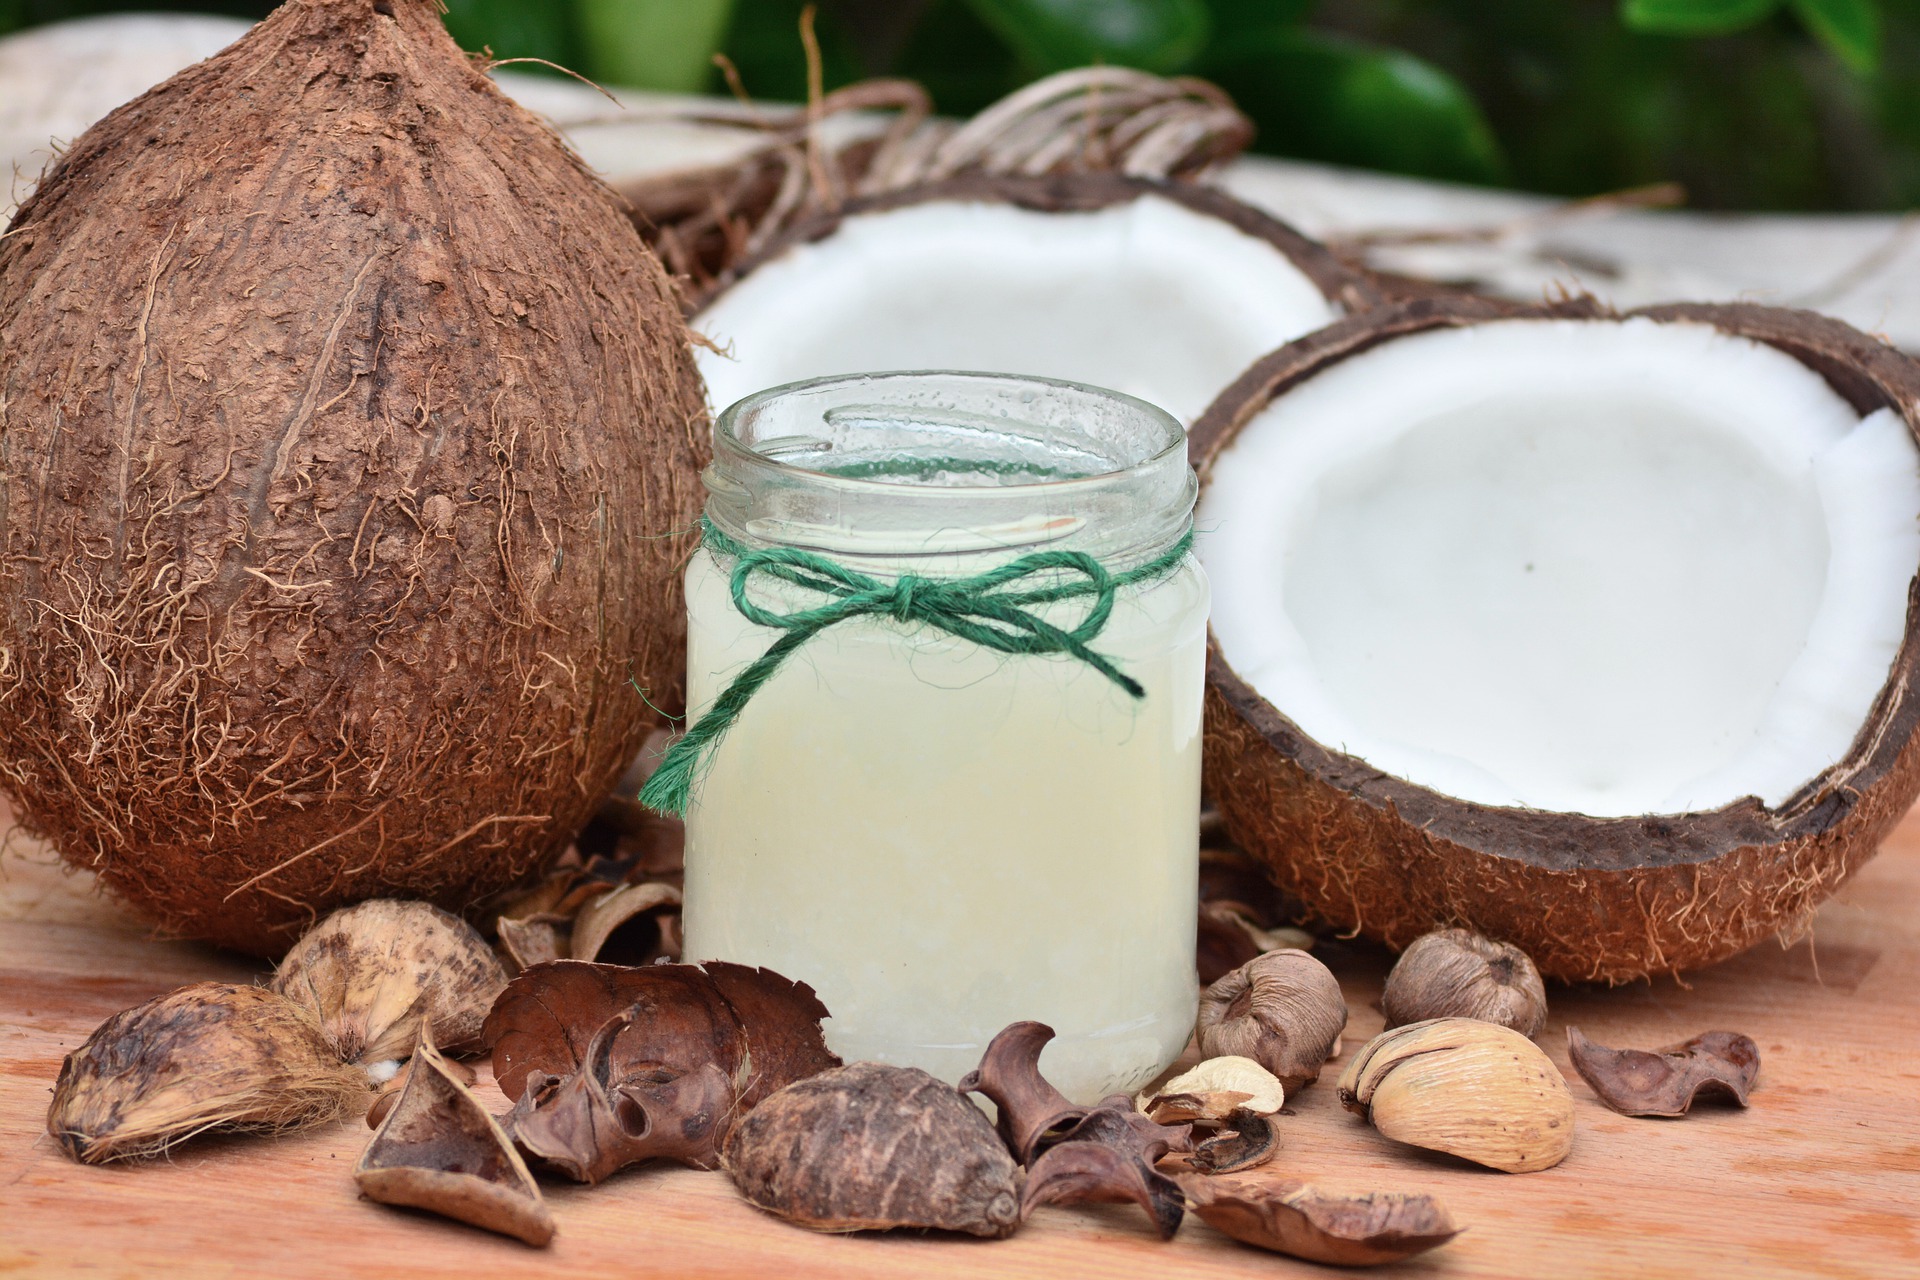 Amazing uses of Coconut Oil for babies: My Experience